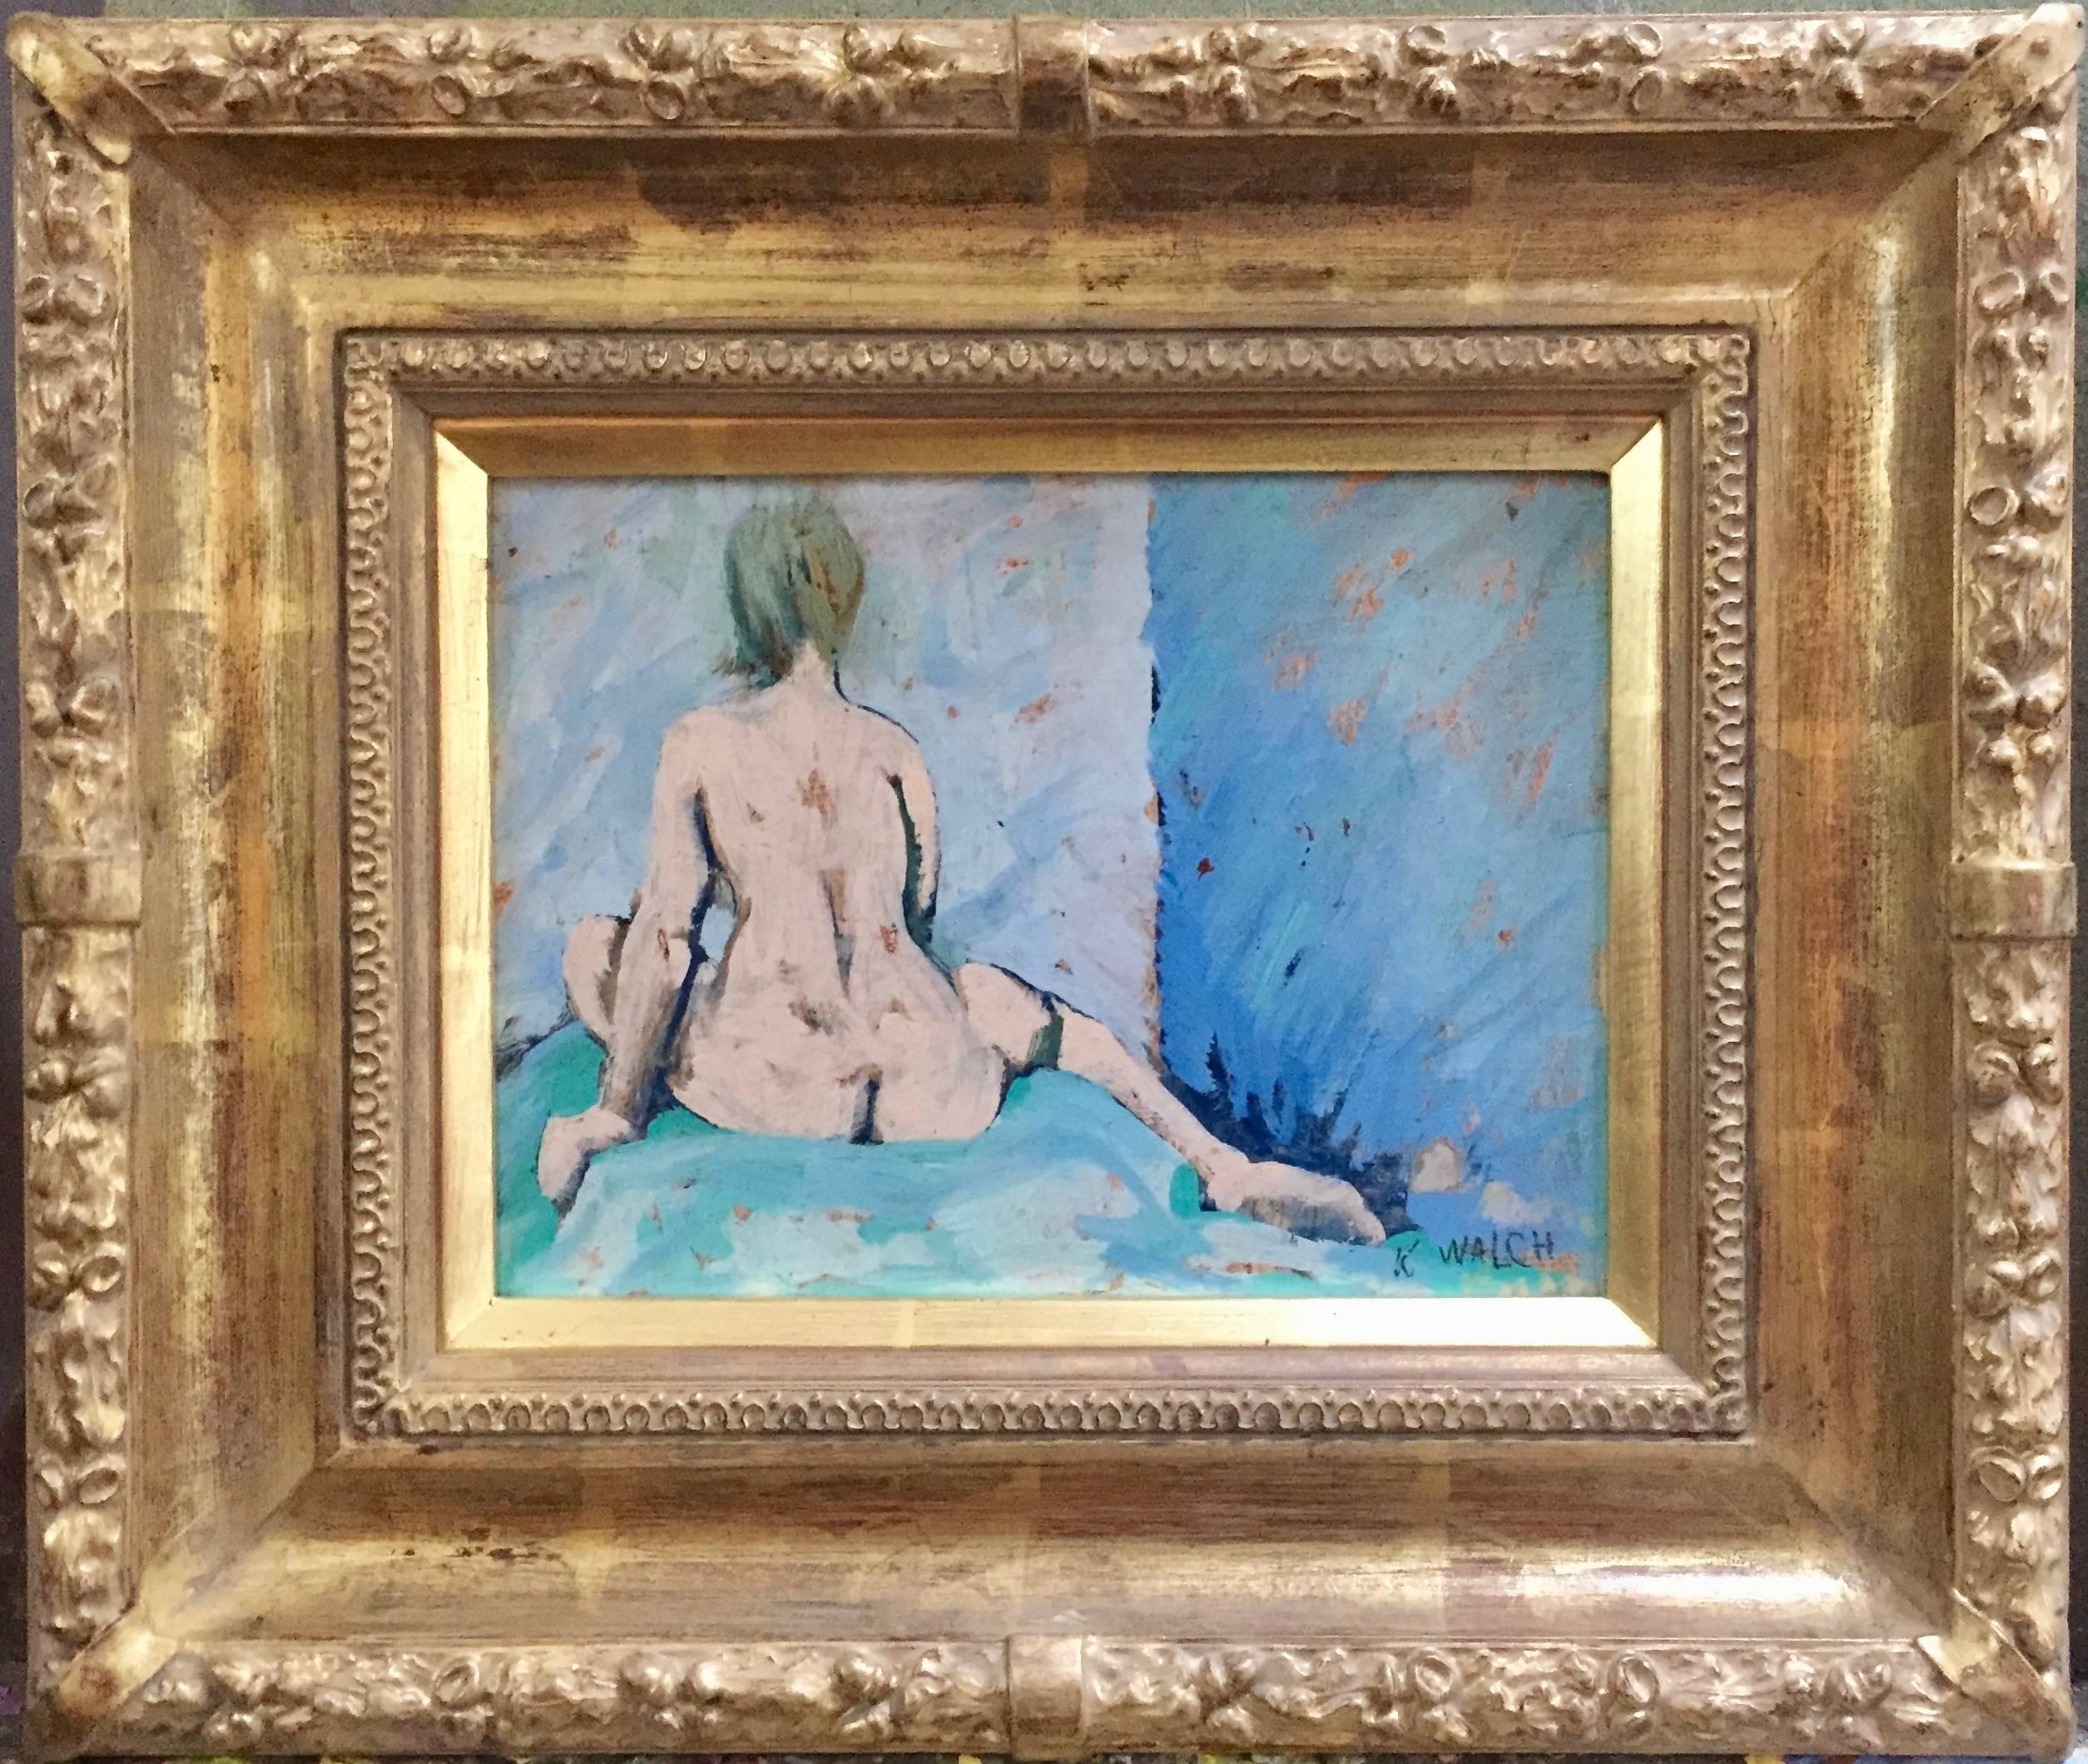 Karl Walch Nude Painting - Female Nude study, from the back in pastel blues and greens